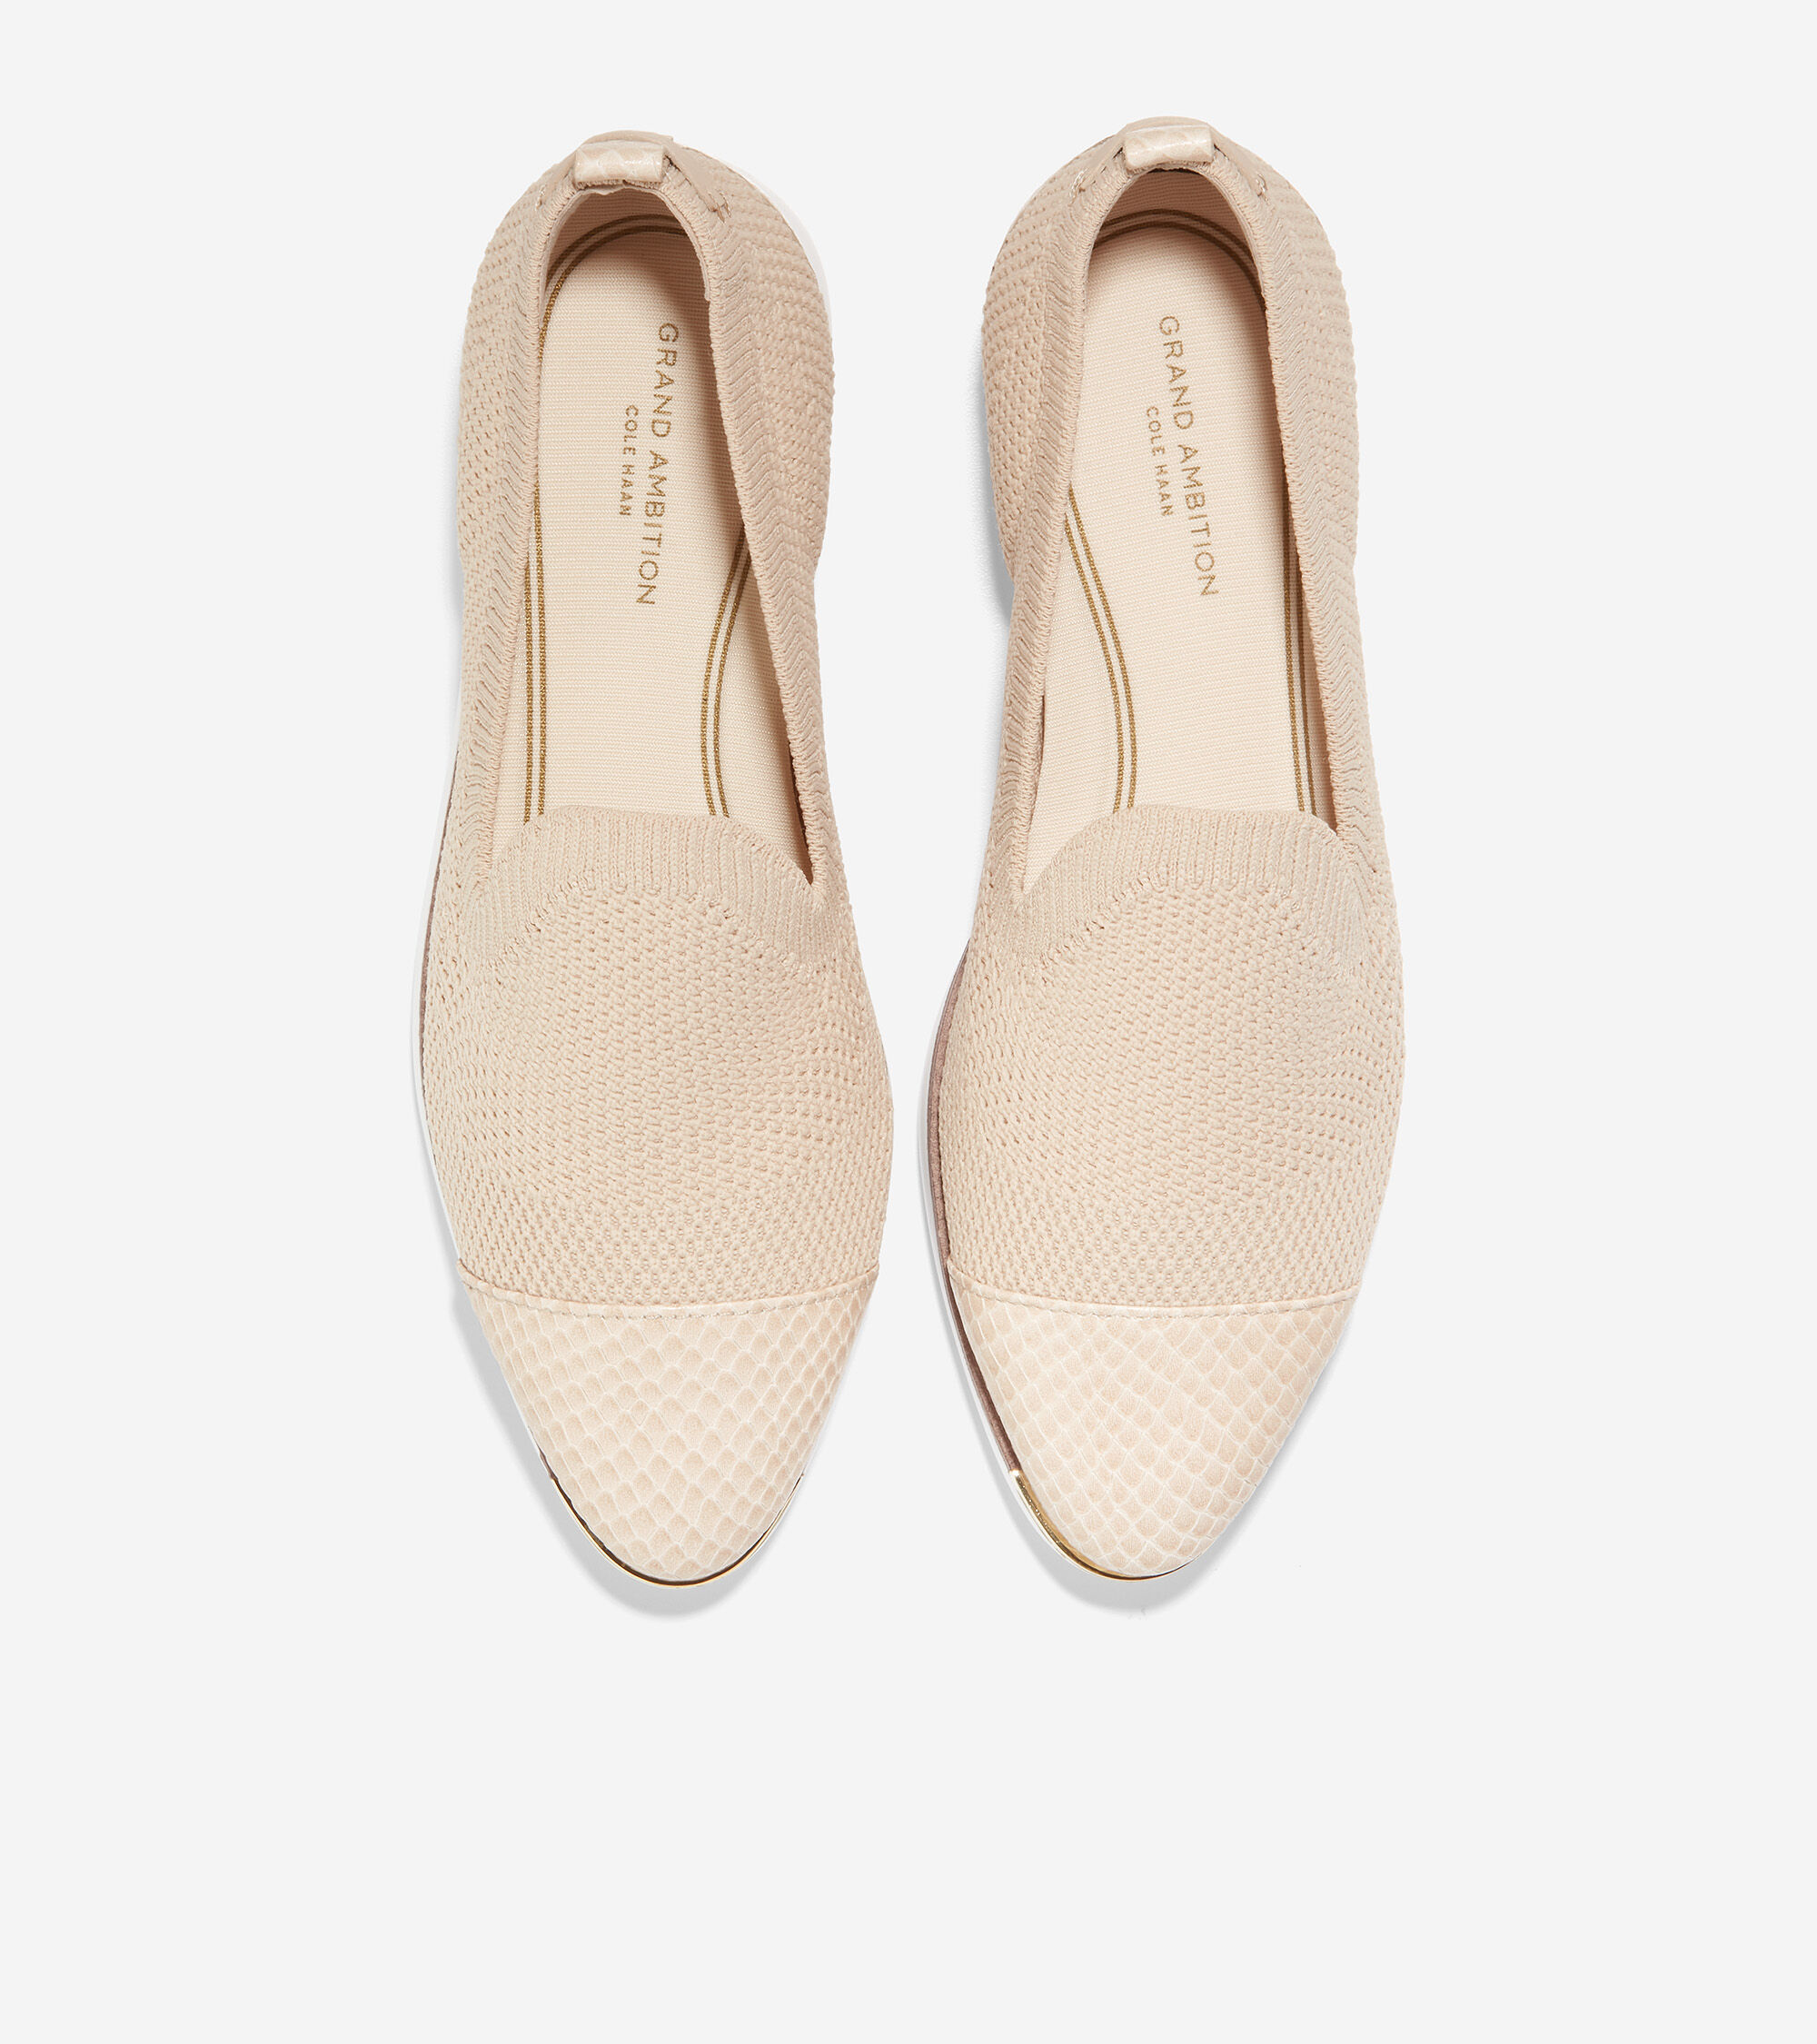 Women's Grand Ambition Slip-On Loafer in Oat Stitchlite™ | Cole Haan